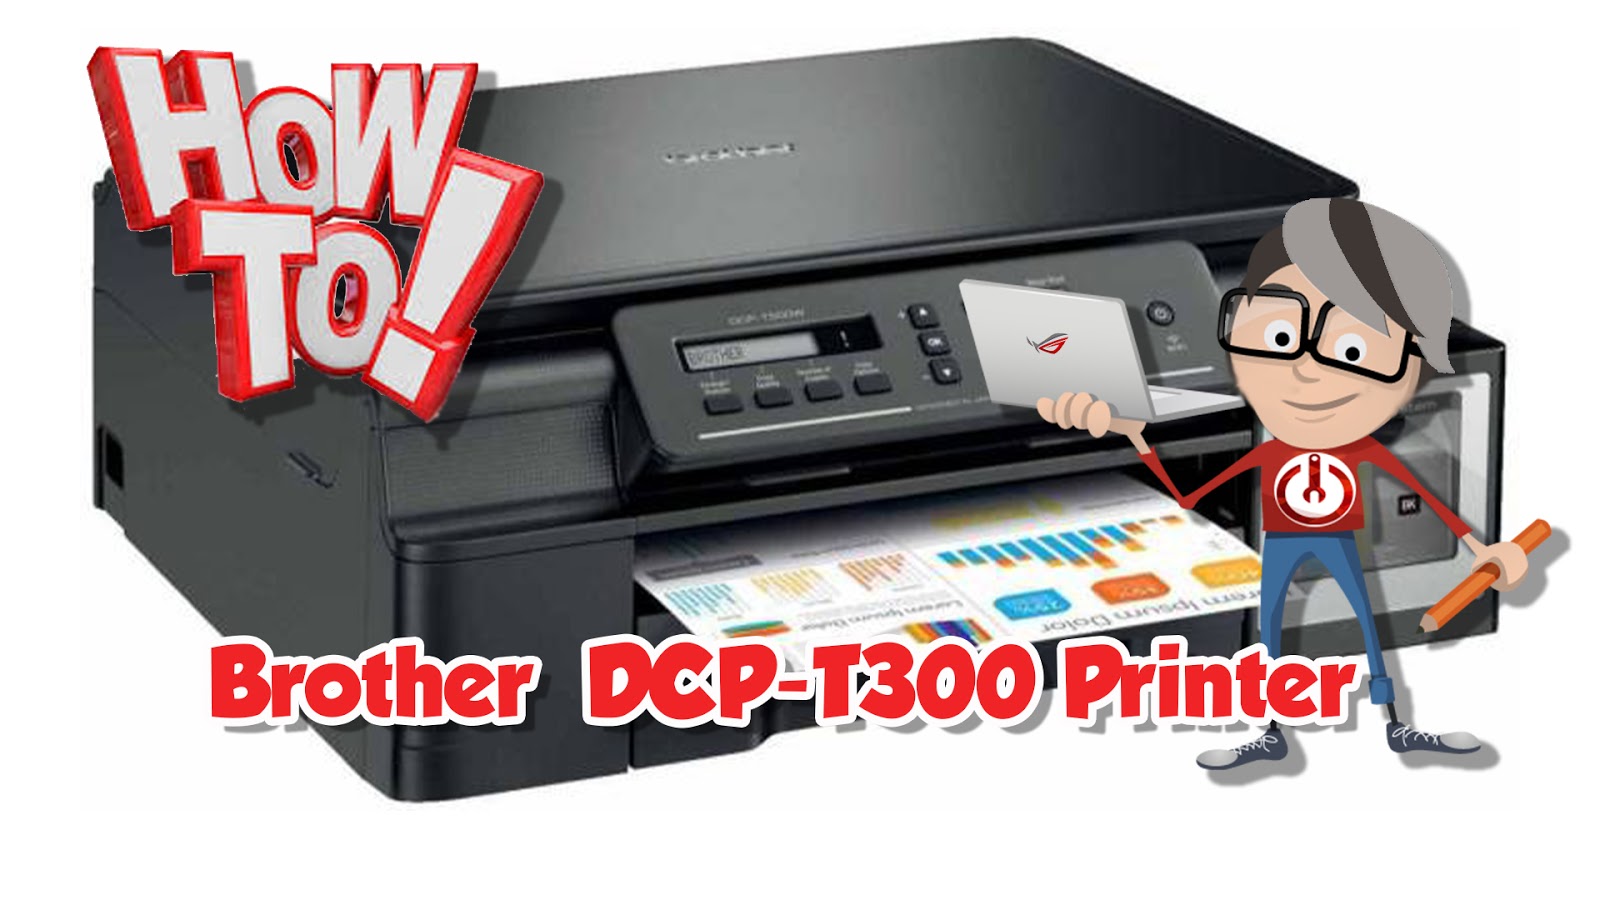 Brother t300. DCP-t300. Brother t300 драйвер. Brother 300 DL.